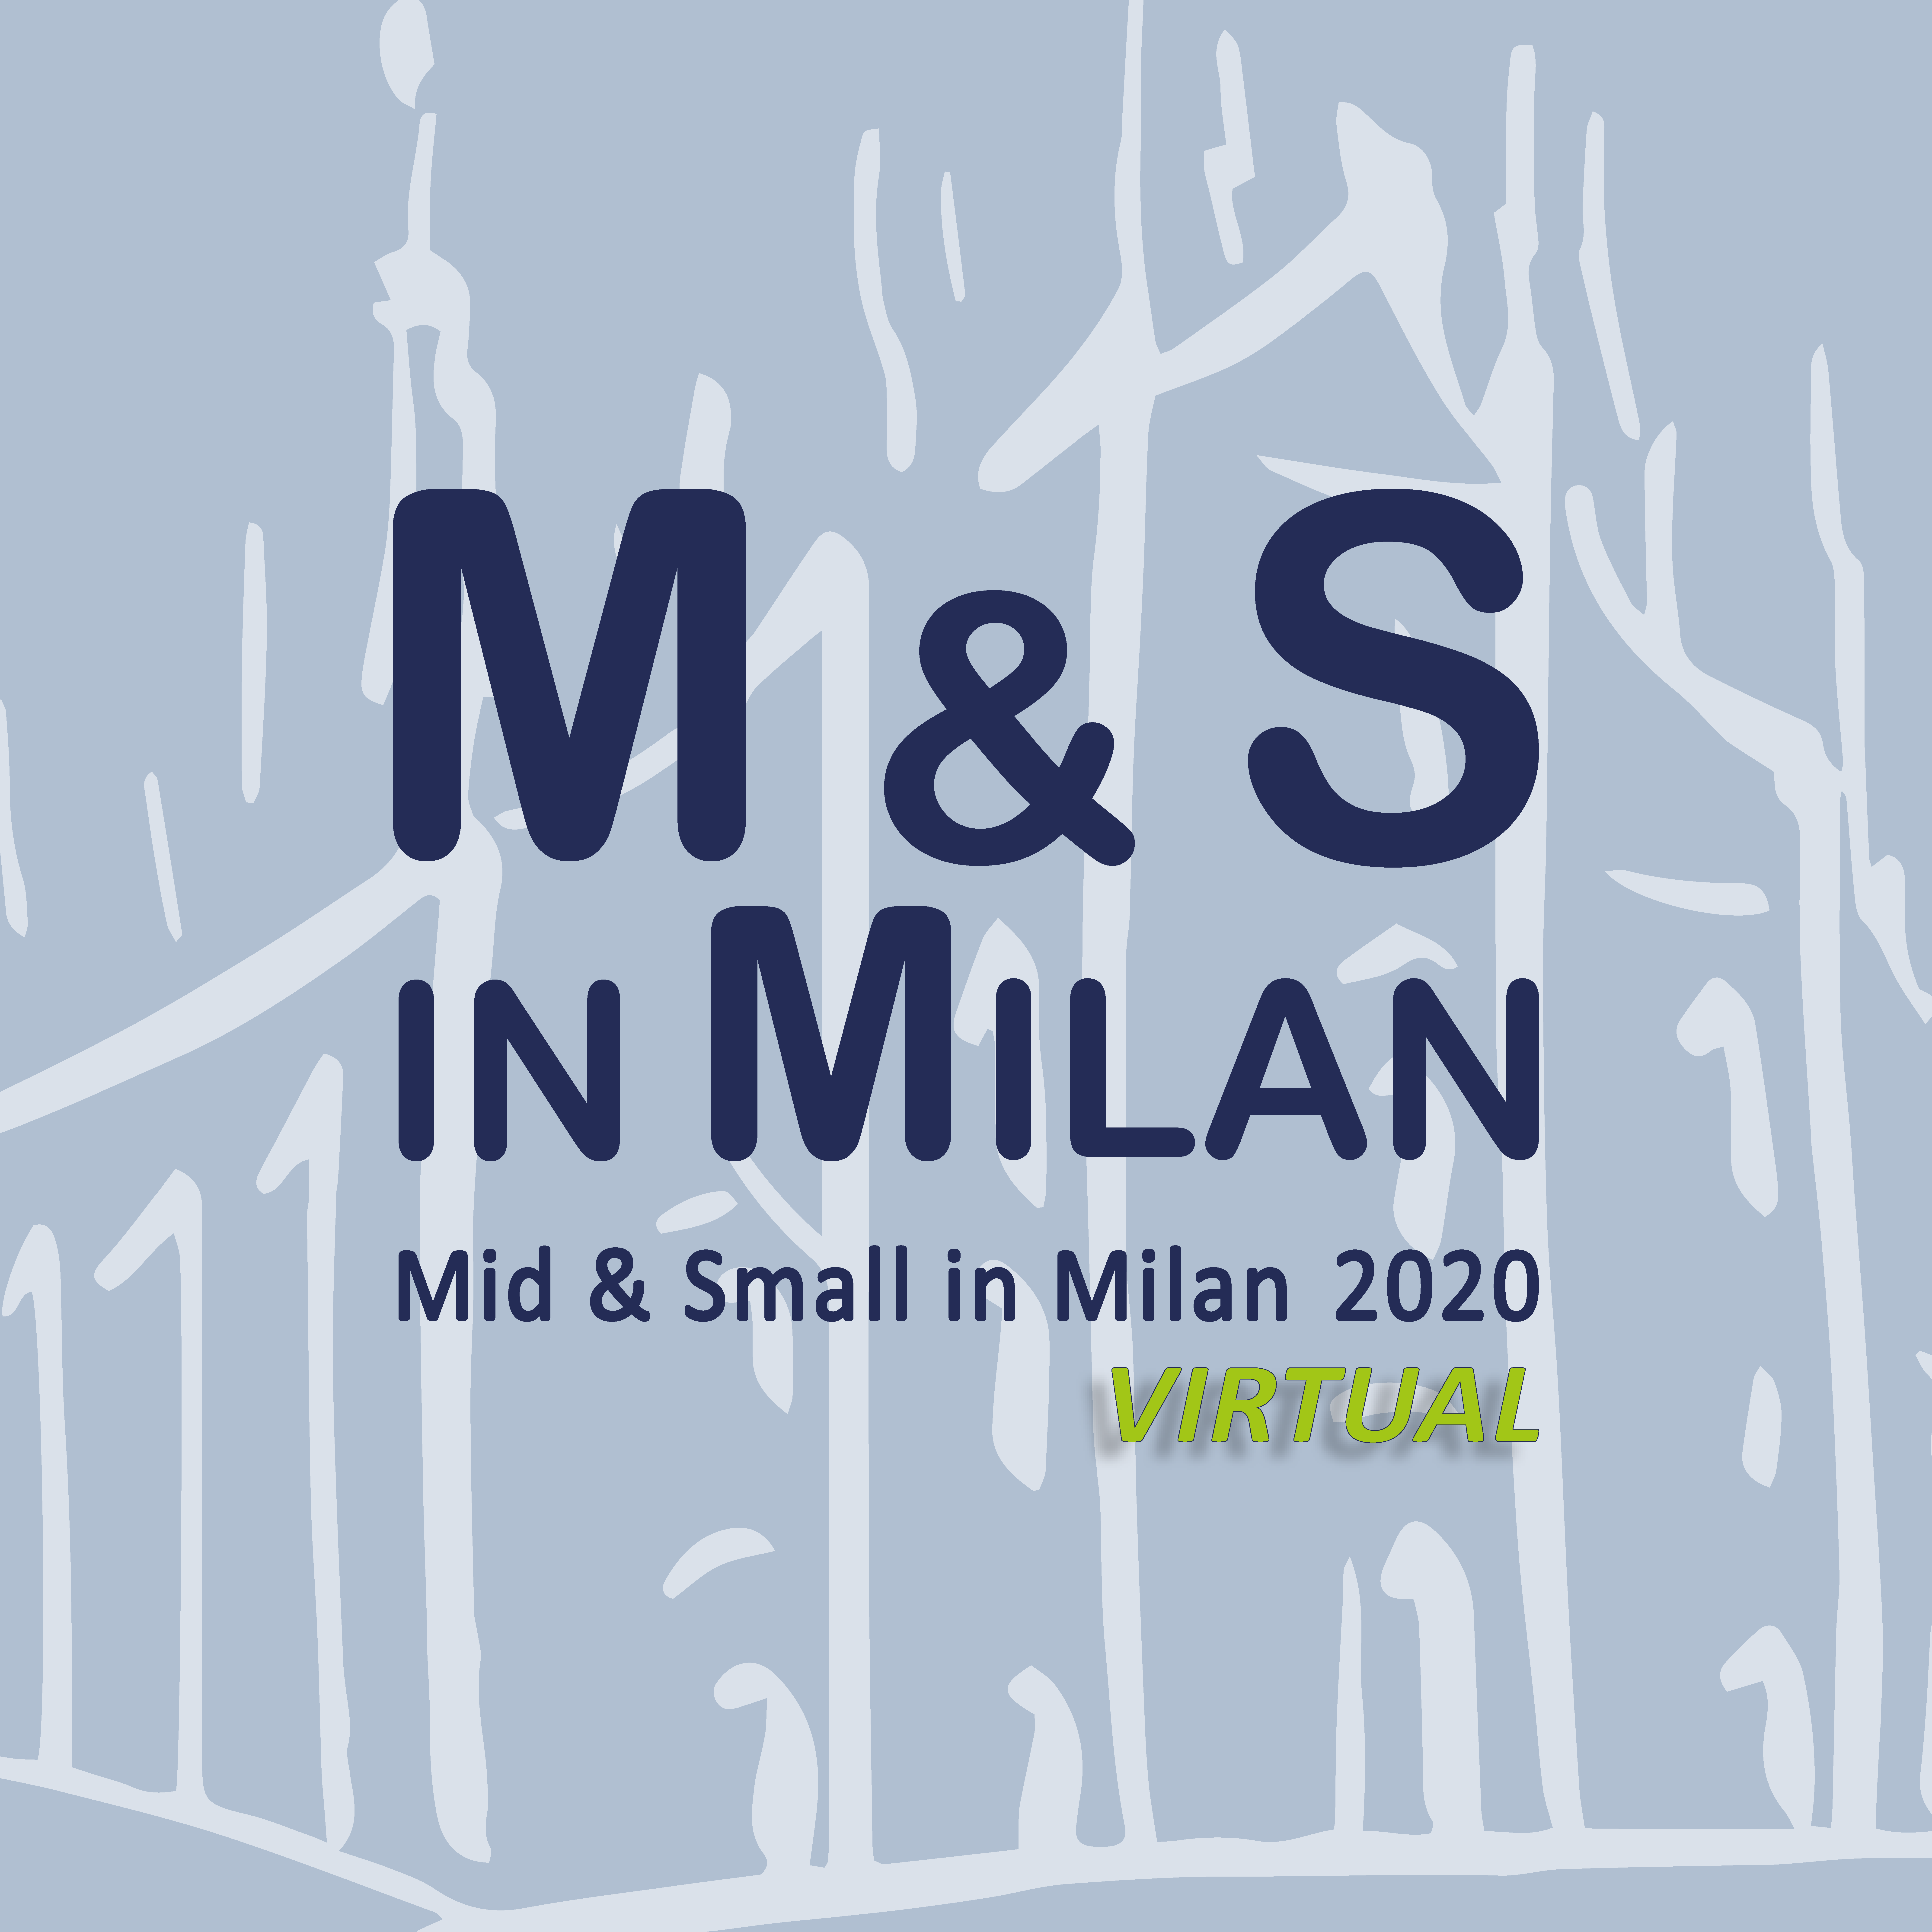 Mid & Small in Milan 2020